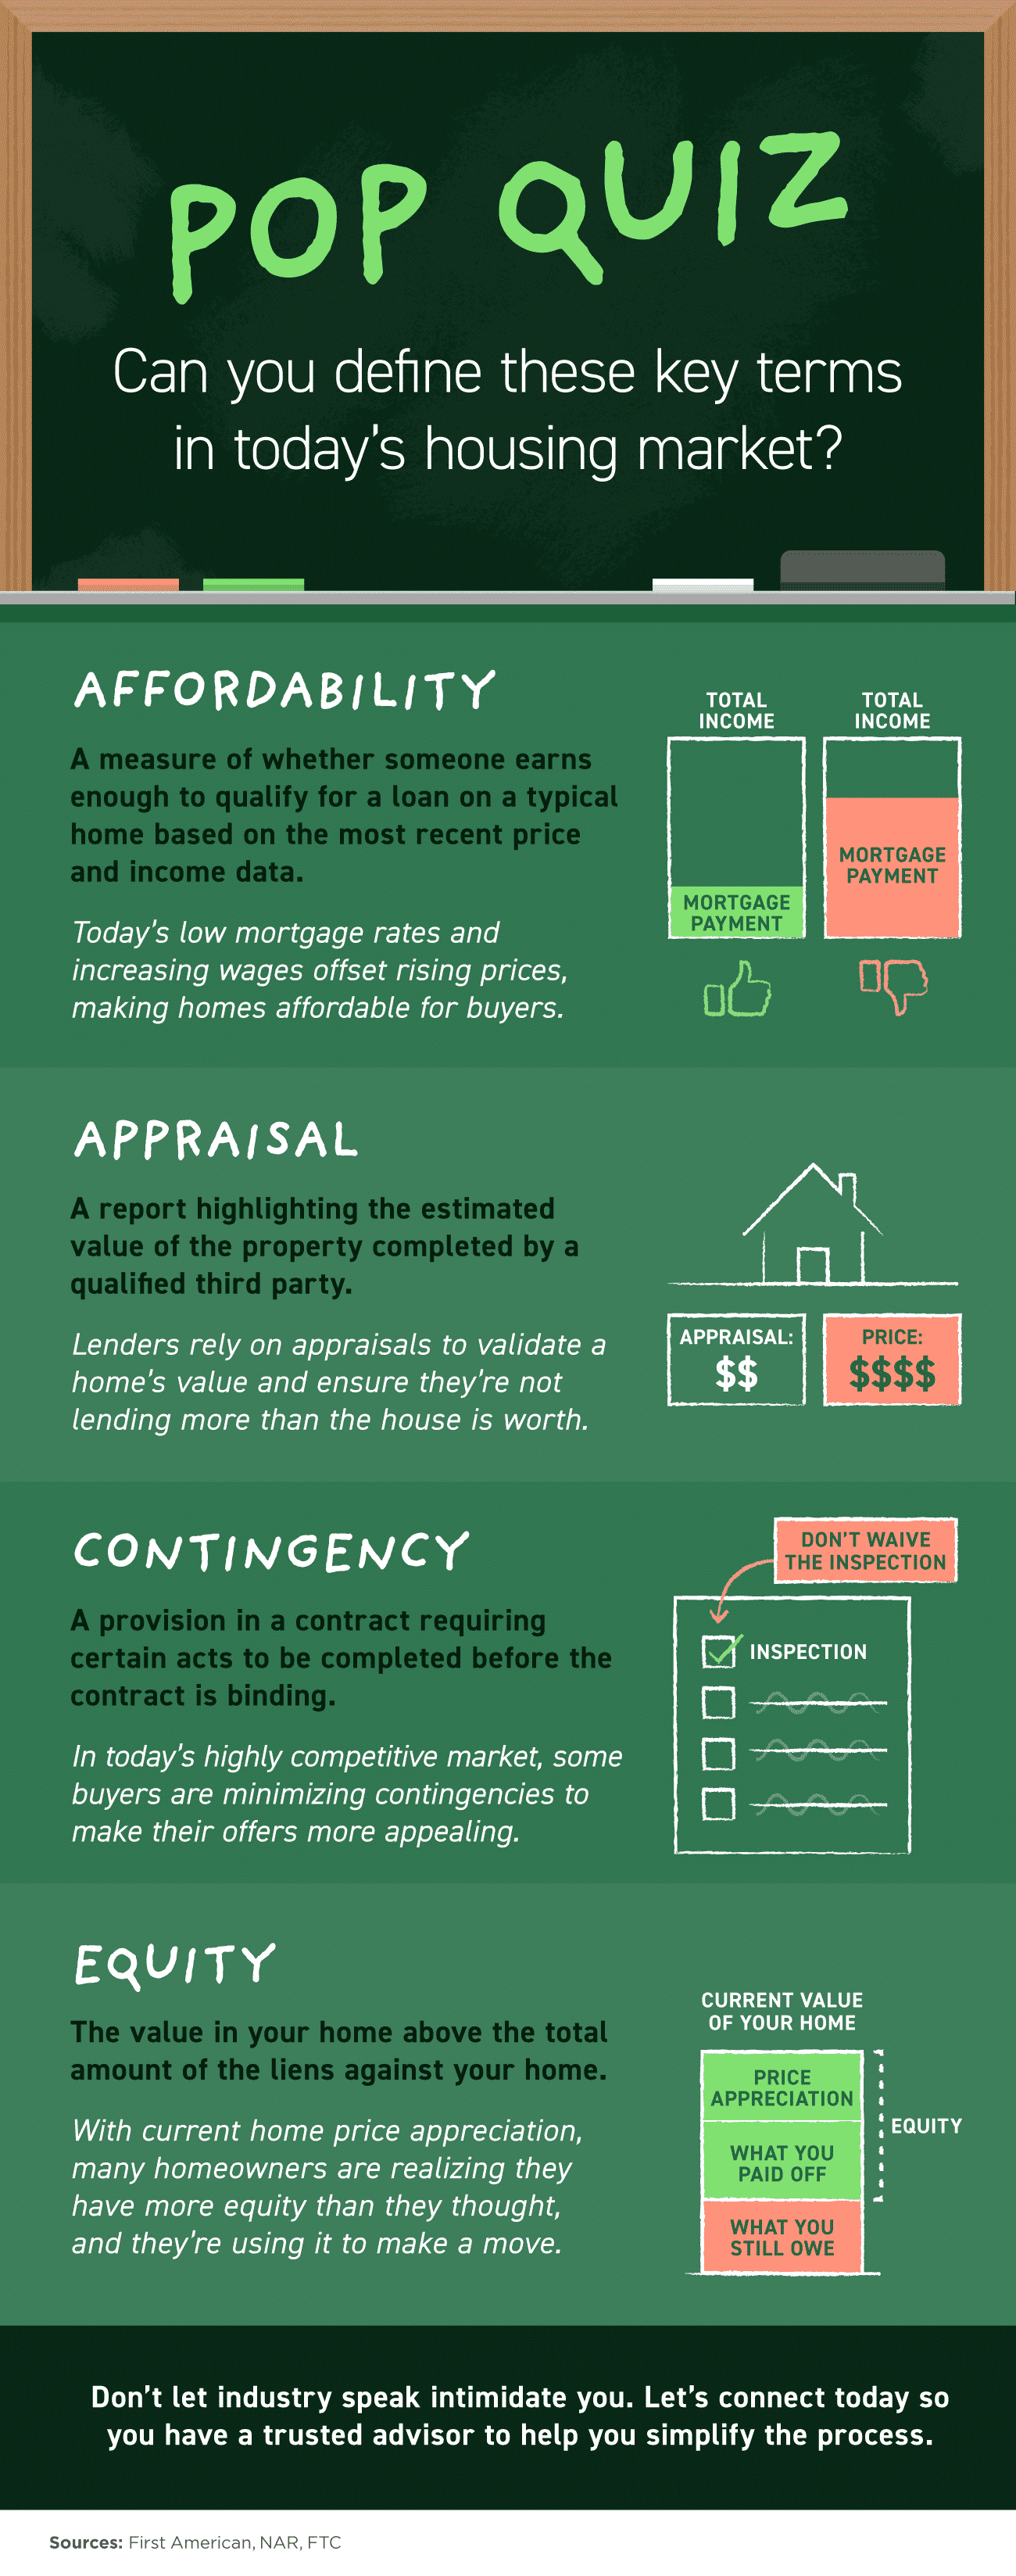 Pop Quiz: Can You Define These Key Terms in Today’s Housing Market? [INFOGRAPHIC]